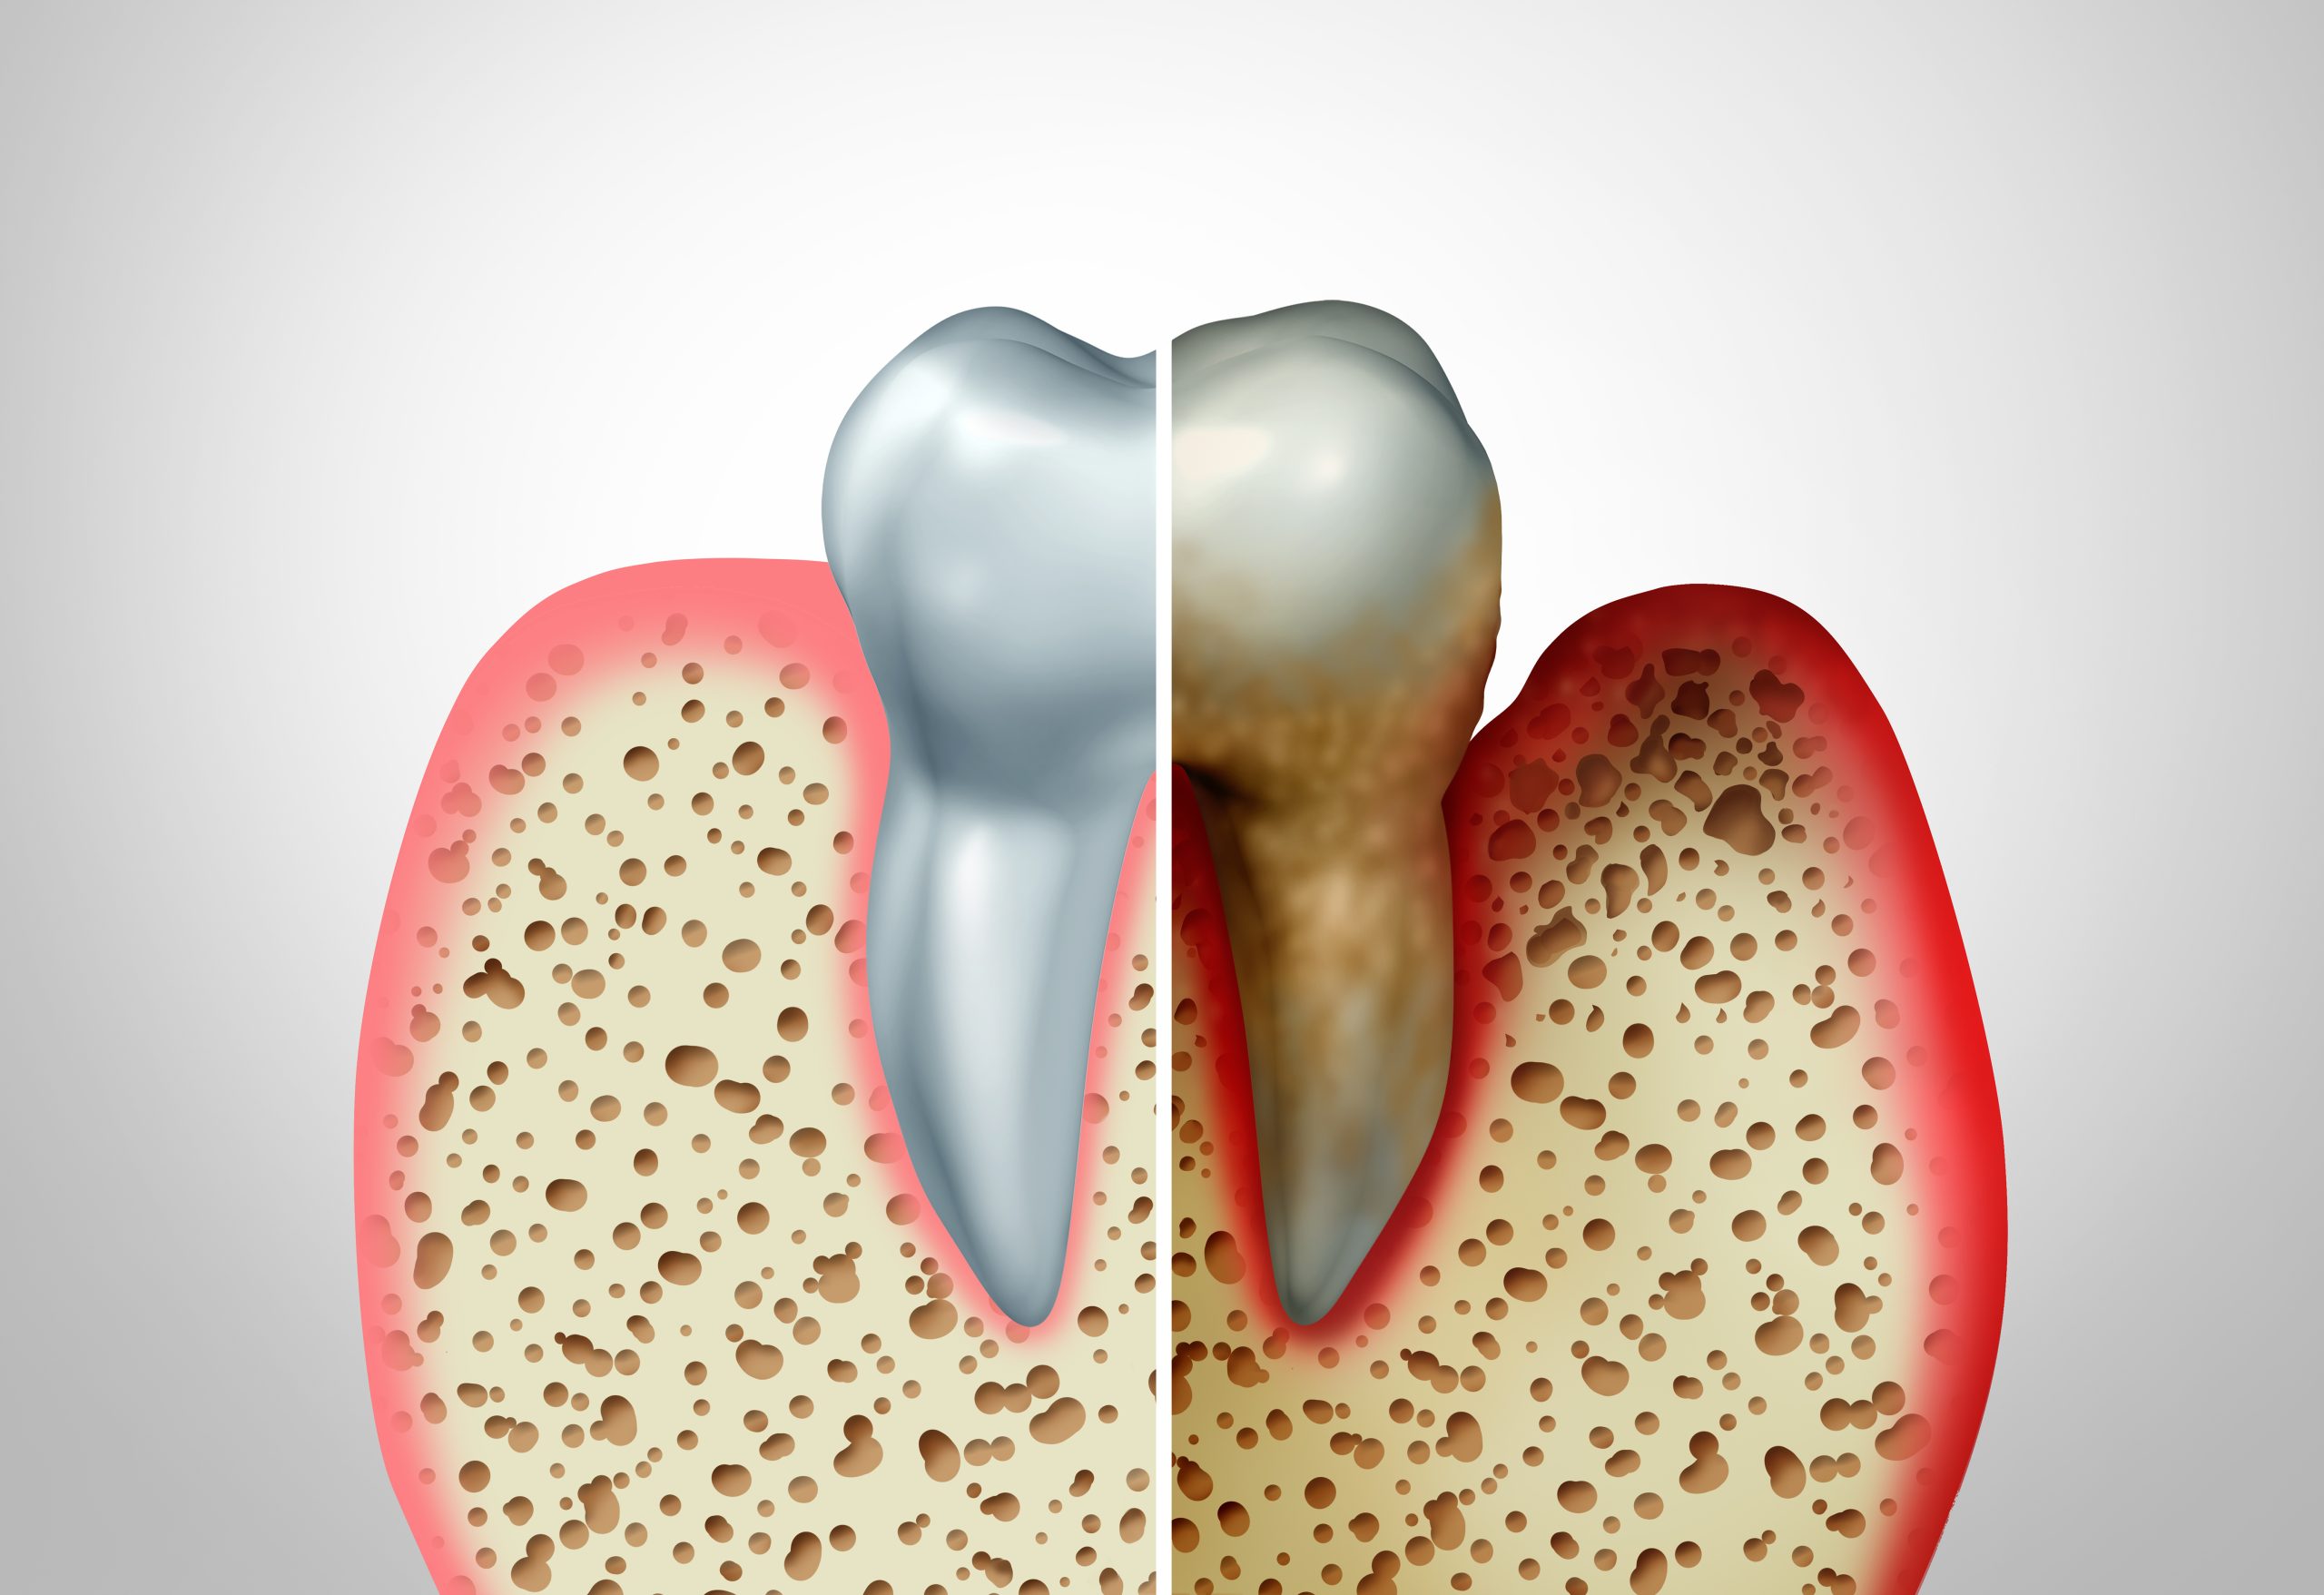 Gum disease comparison with a healthy tooth and an unhealthy one with periodontitis and poor oral hygiene health problem as a bacteria infection diagram concept with inflammation as a 3D illustration.